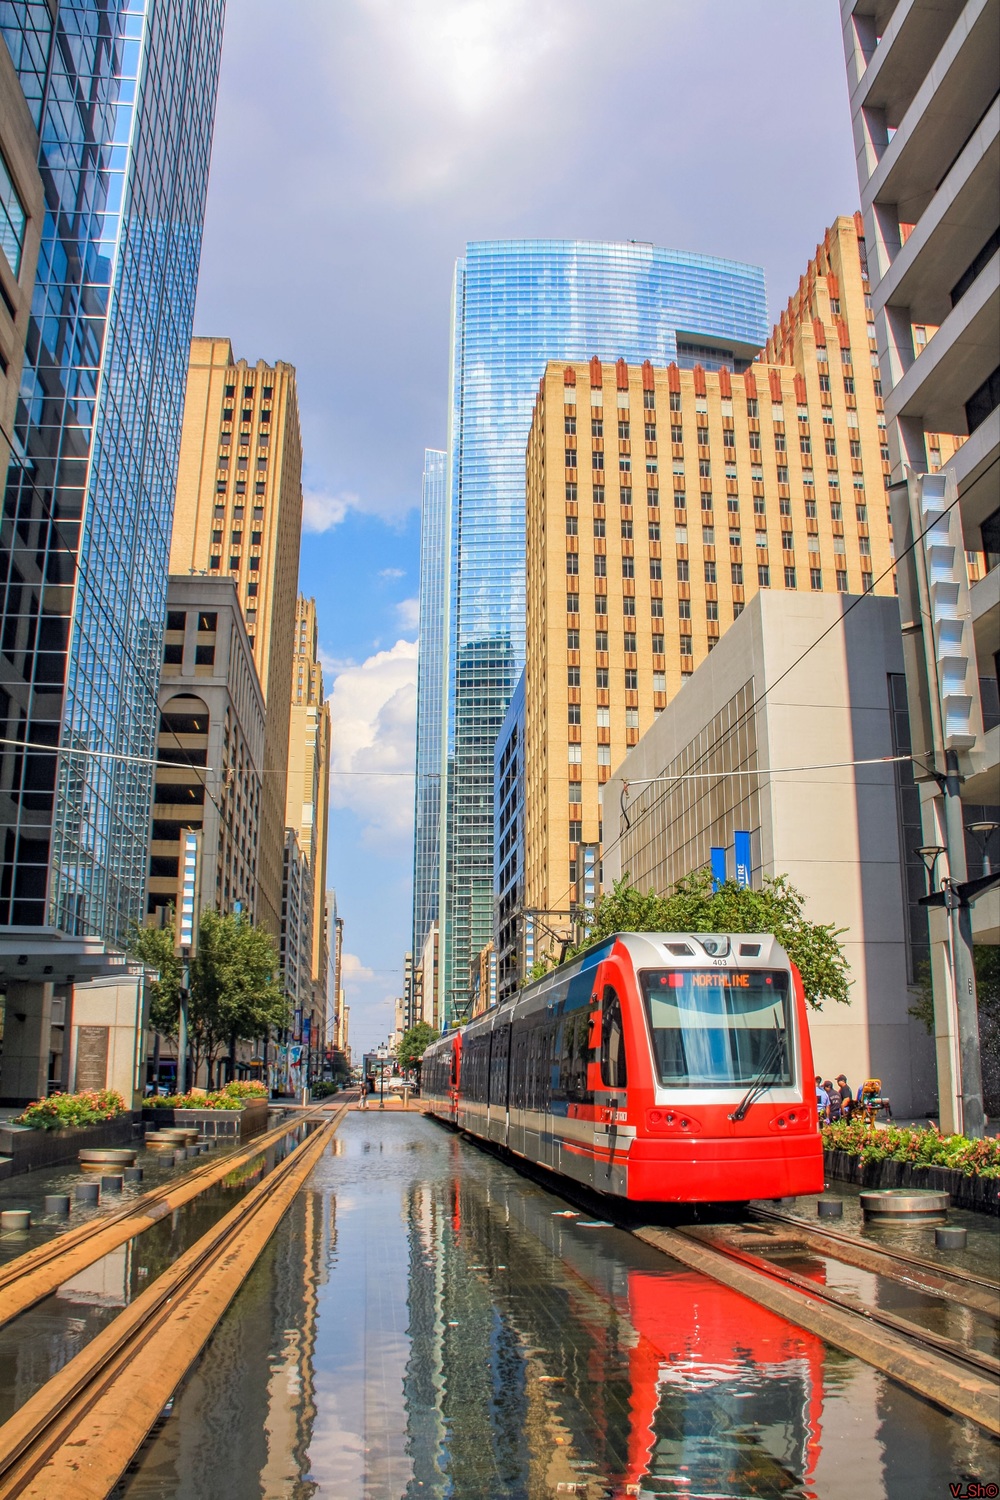 Houston, Siemens S70 LRV nr. 403; Houston — Lines and Infrastructure